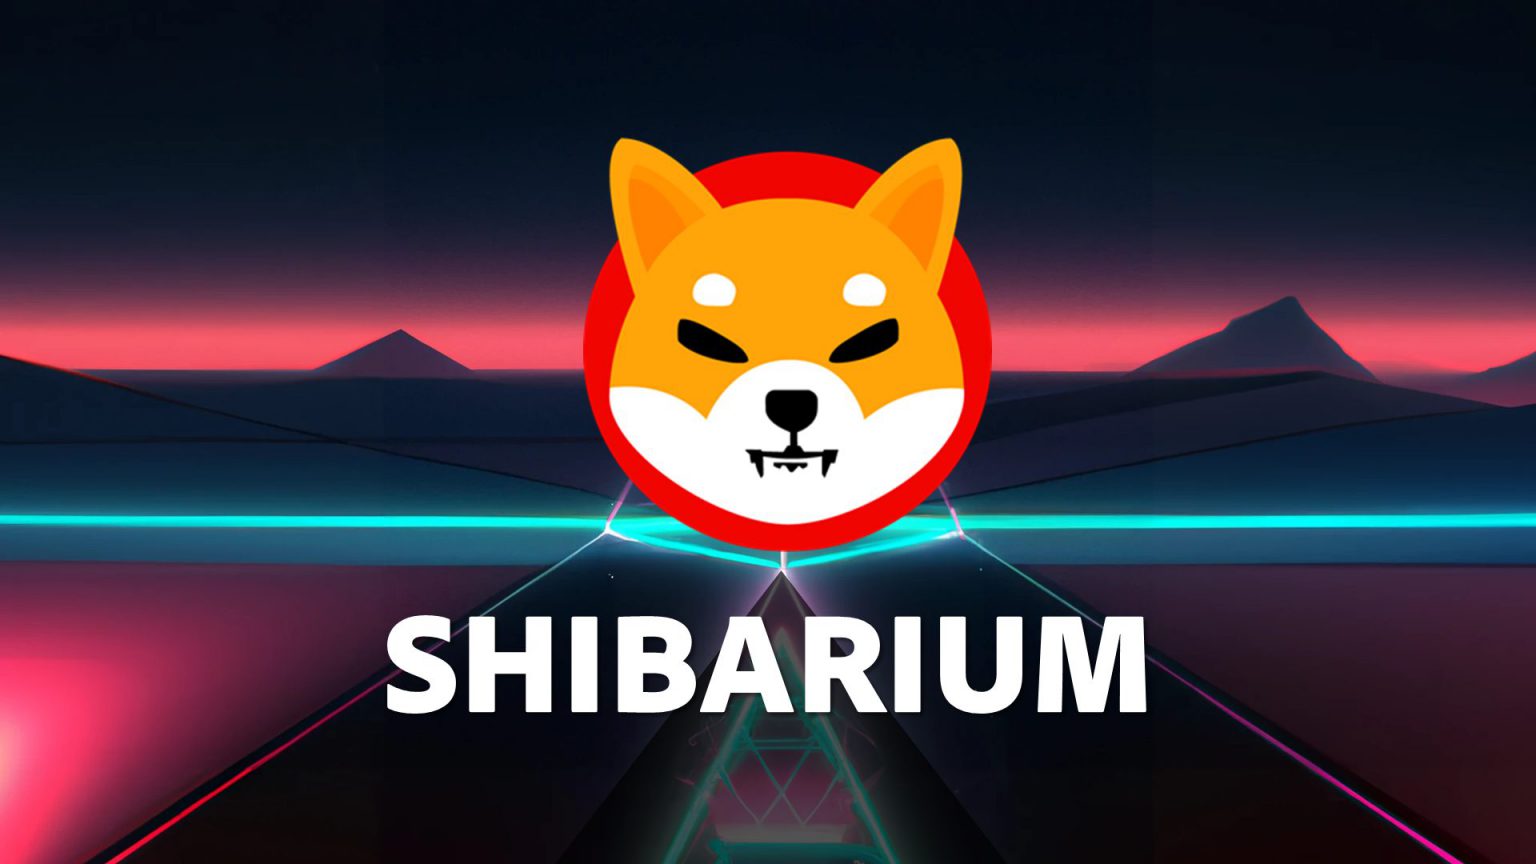 Shibarium Records Explosive Growth Shortly After Relaunch